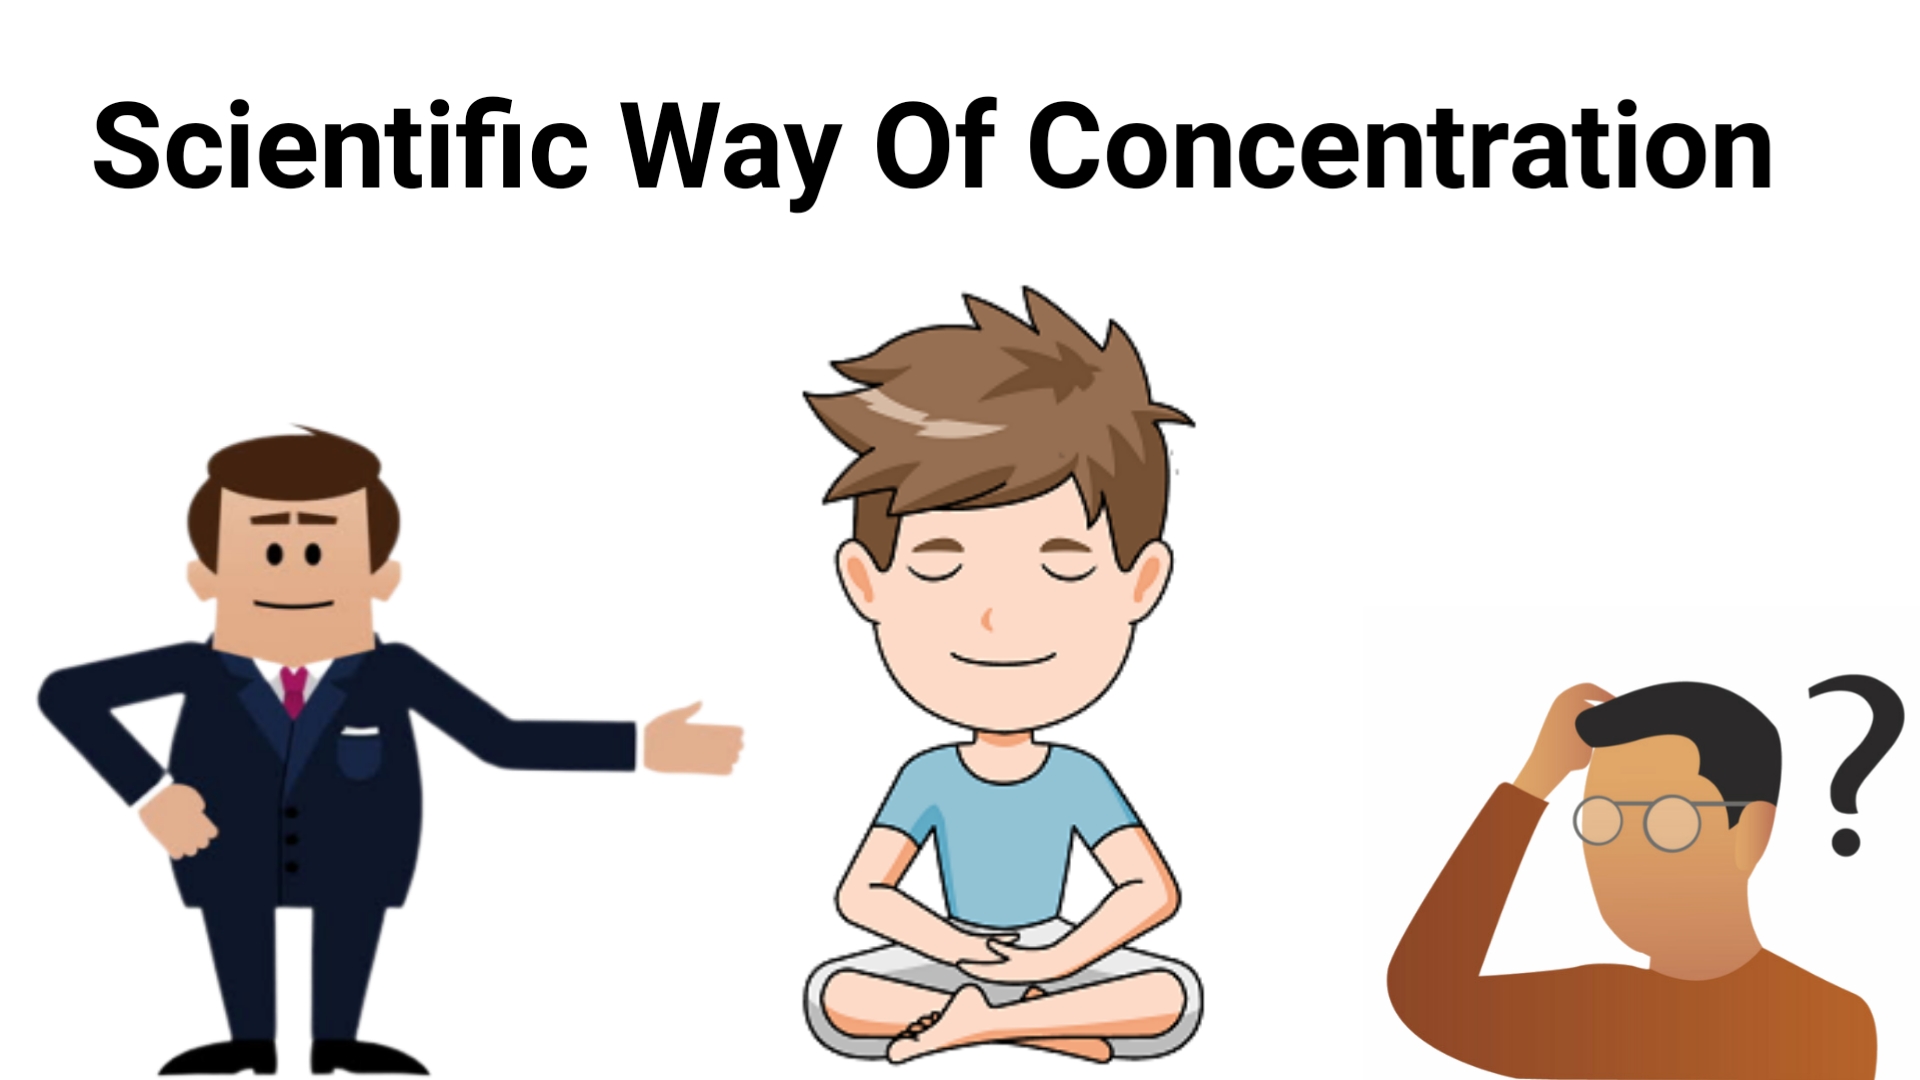 How to increase concentration scientifically?